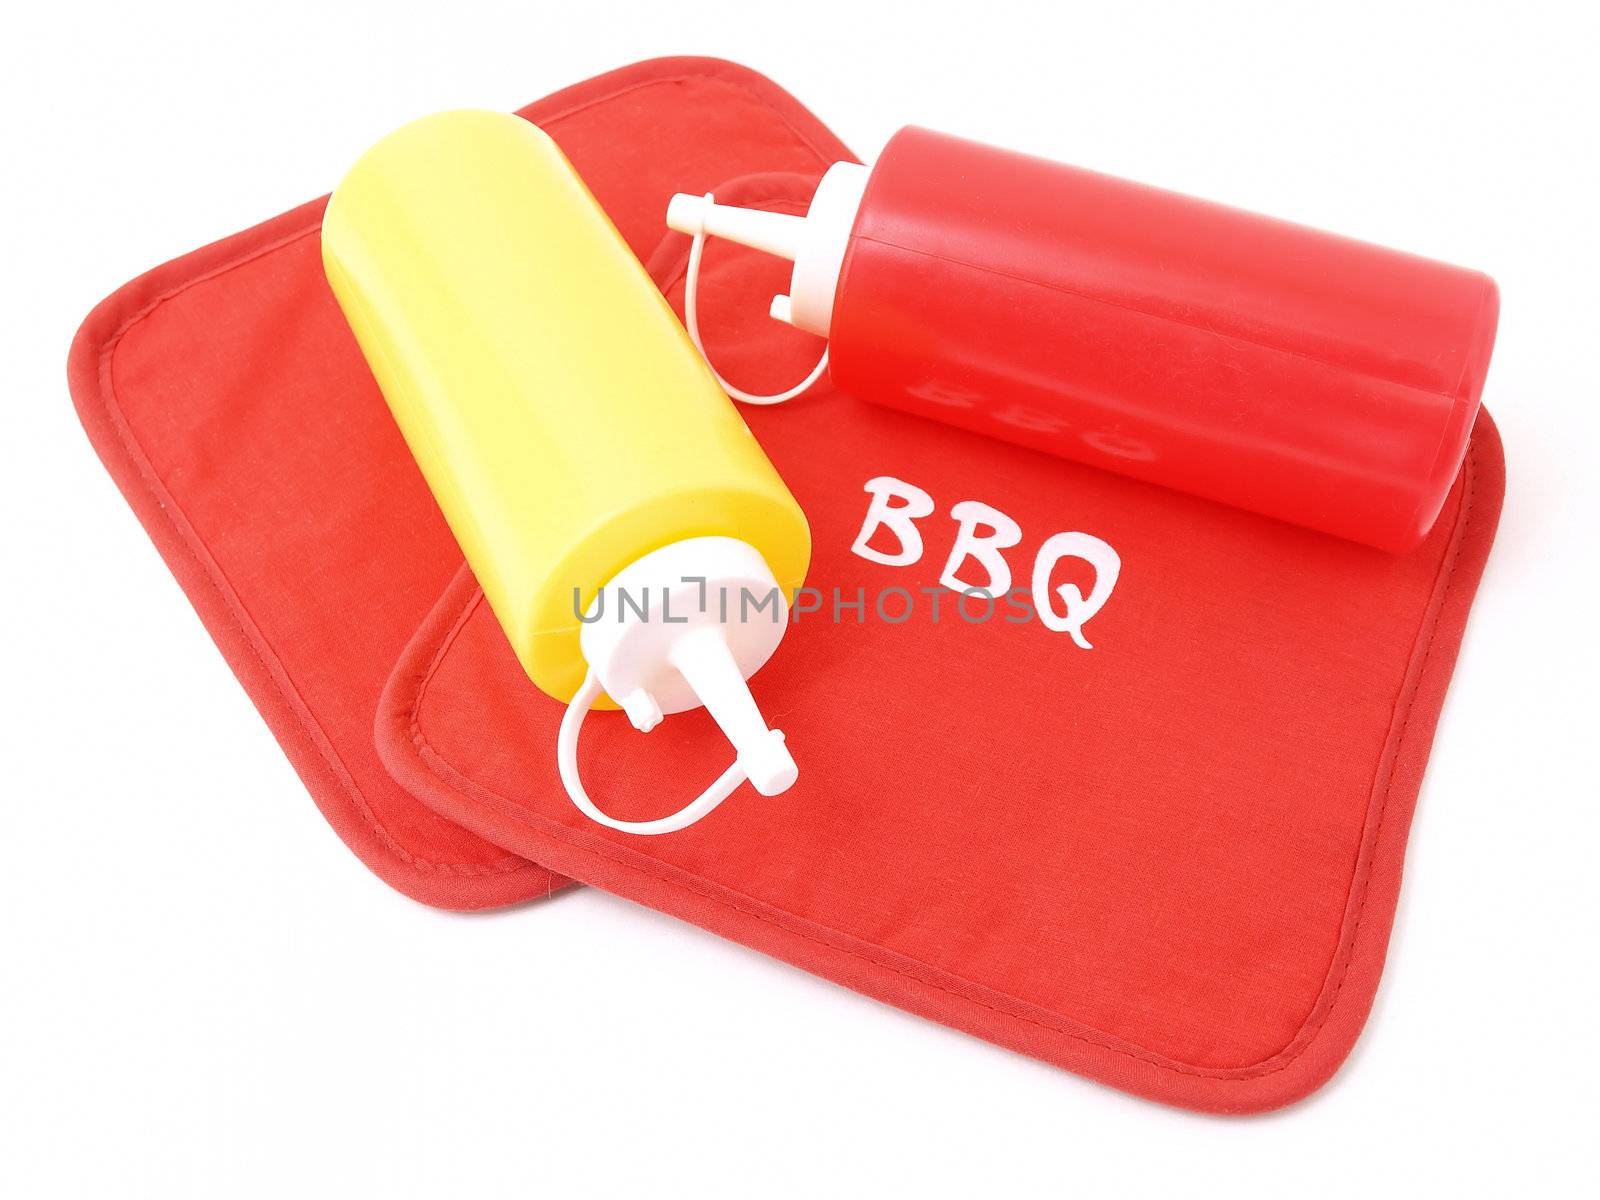 Ketchup and Mustard Containers by RGebbiePhoto